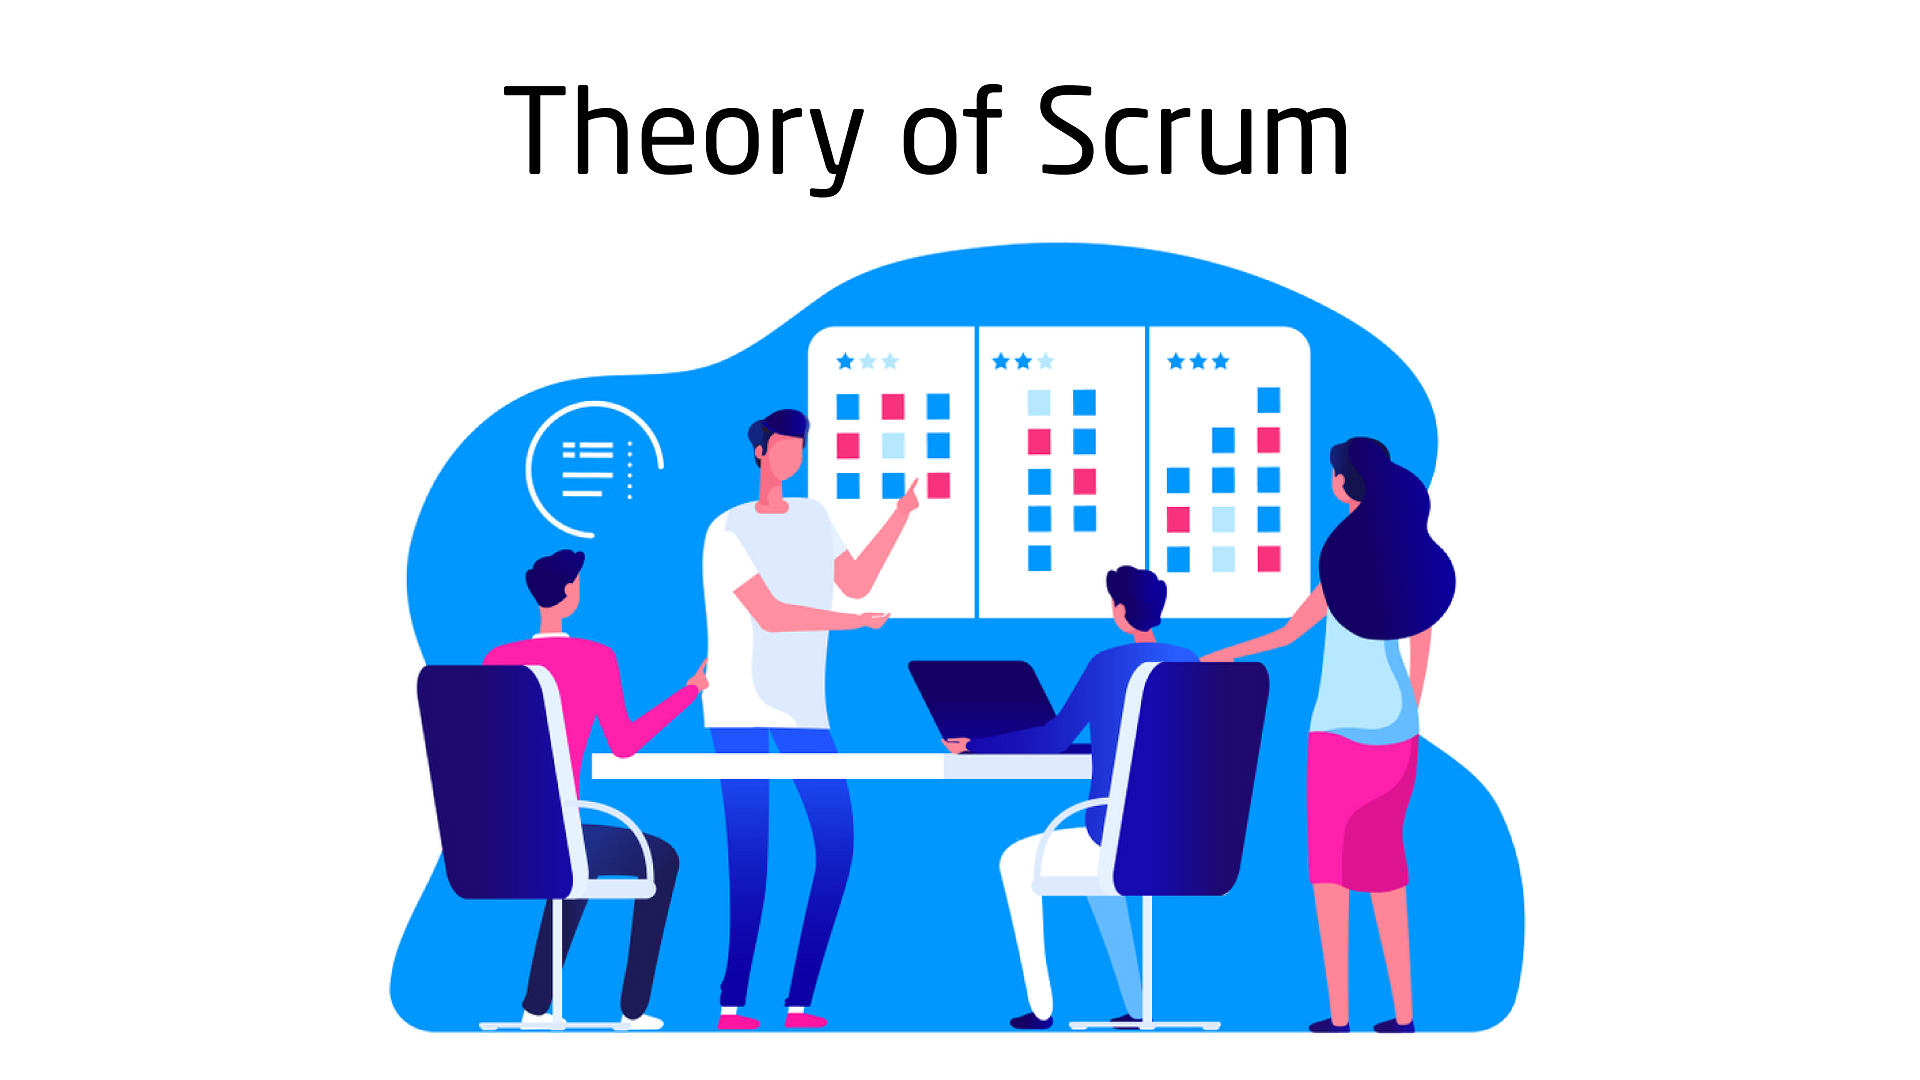 The Theory of Scrum